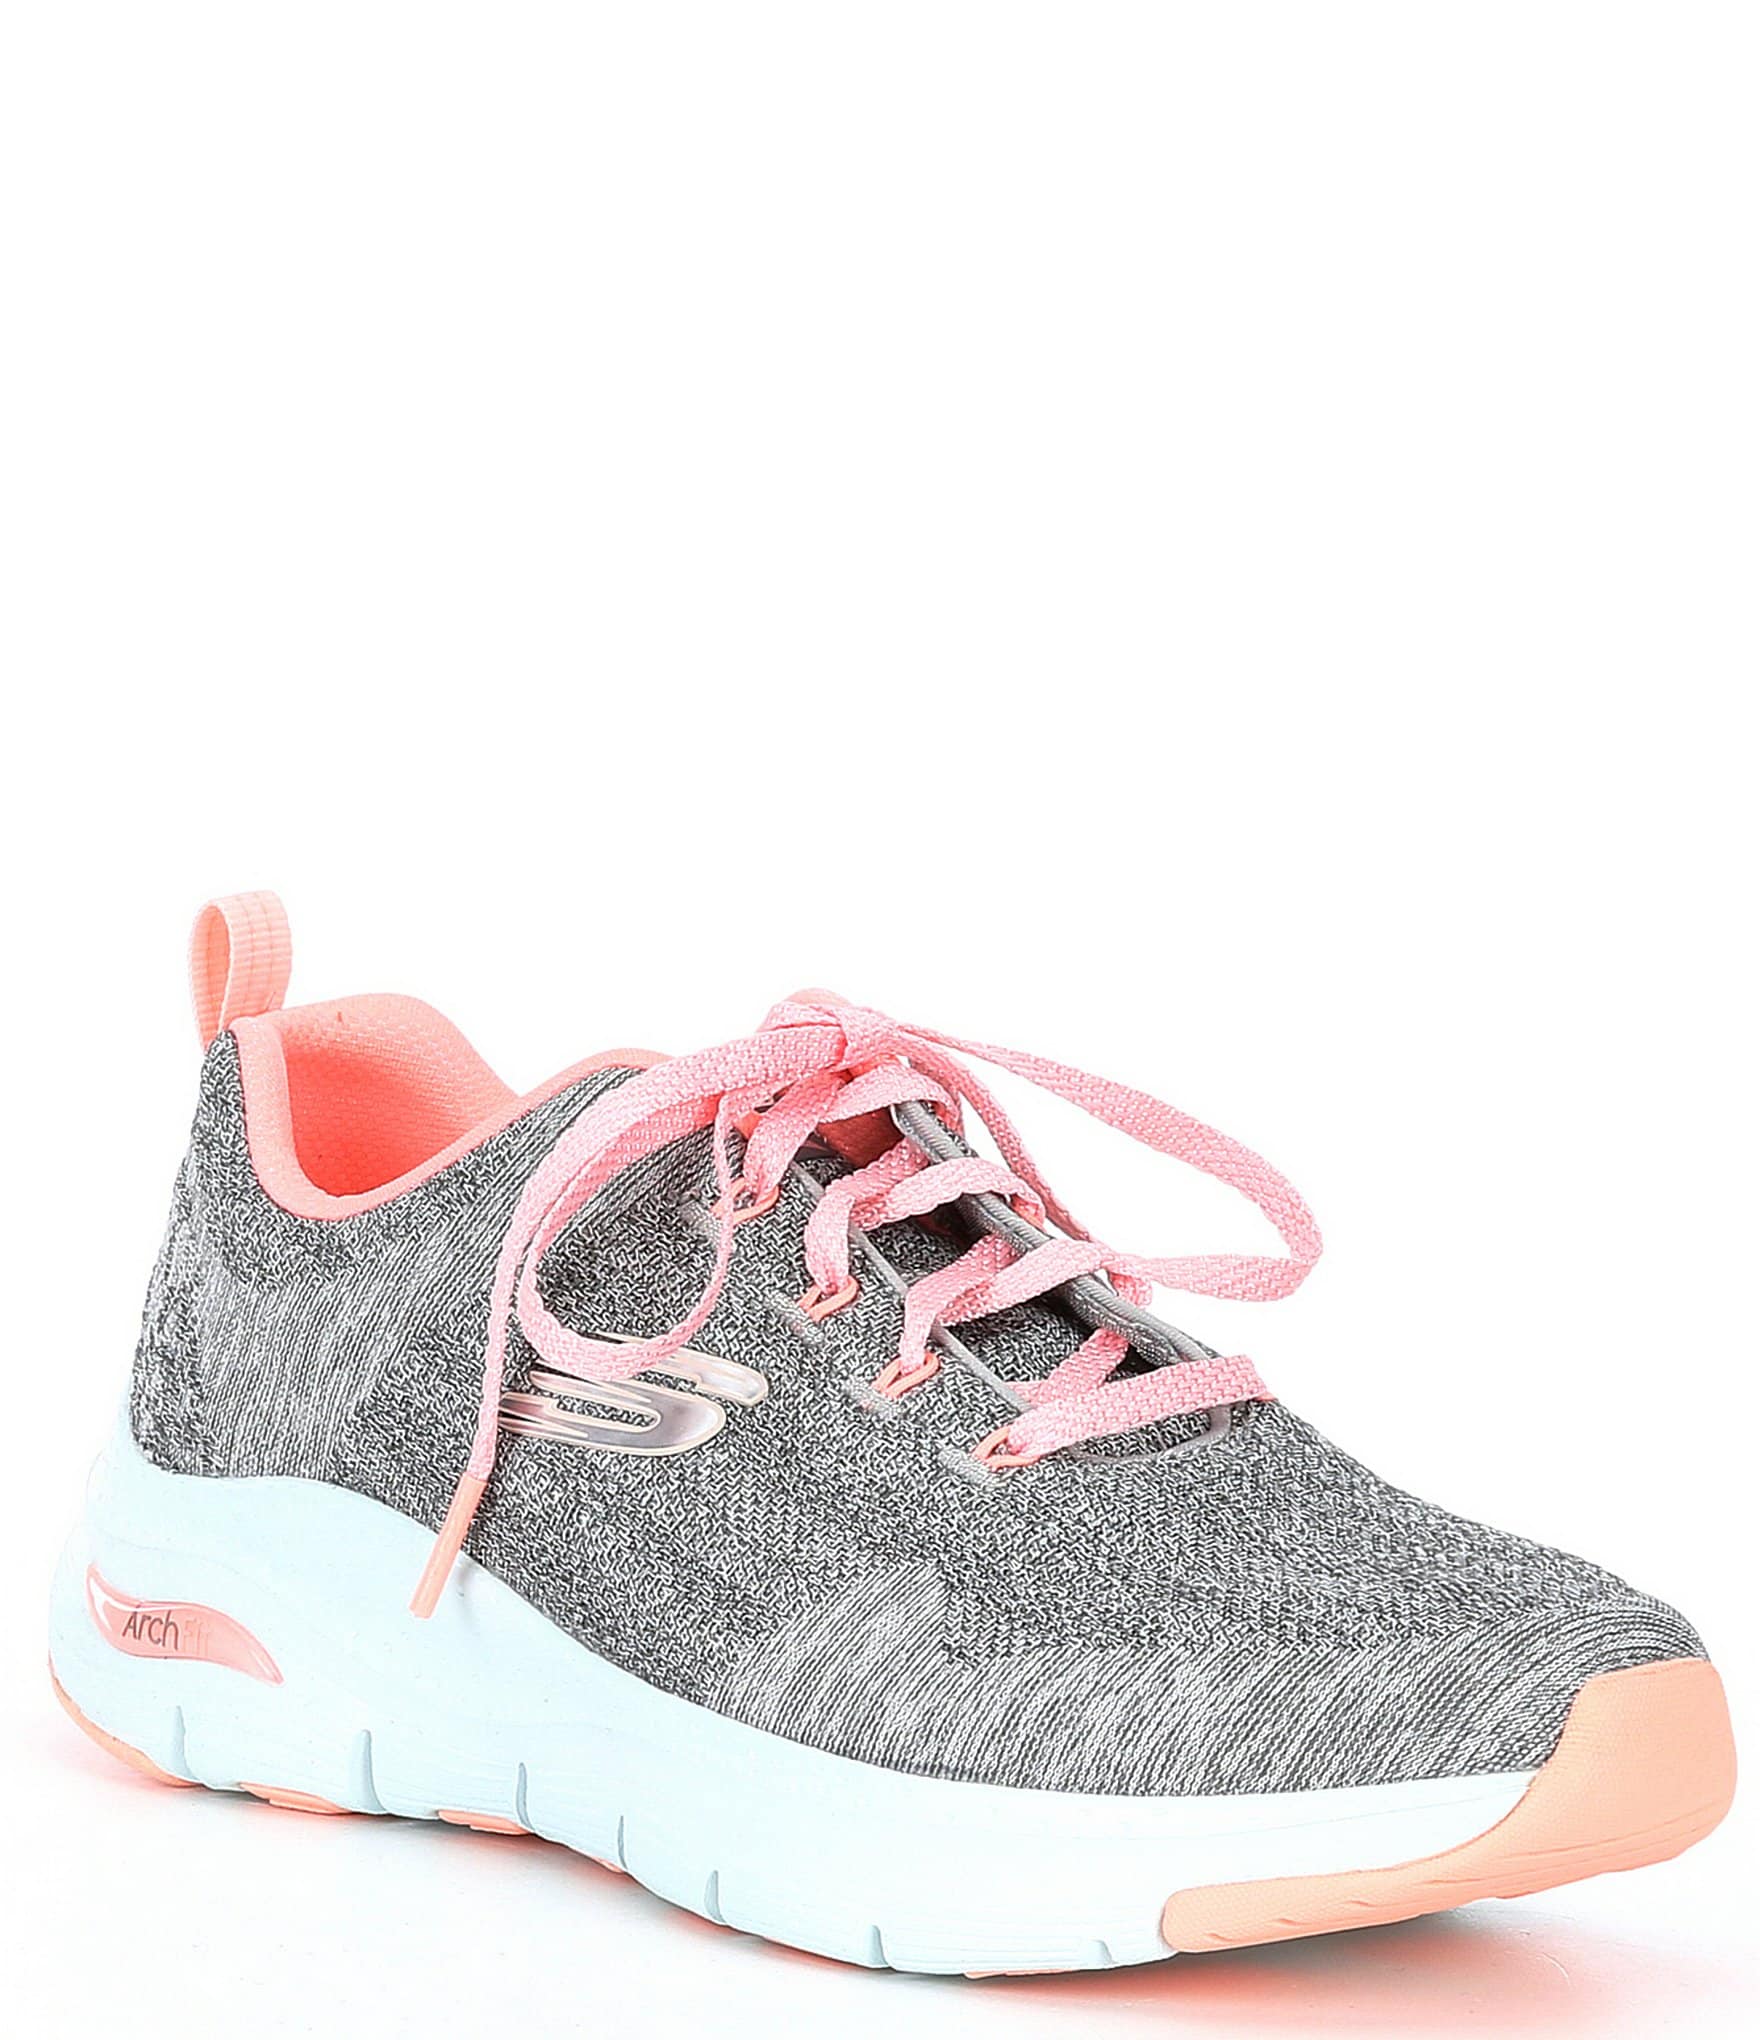 Skechers Arch Fit Comfy Wave Walking 